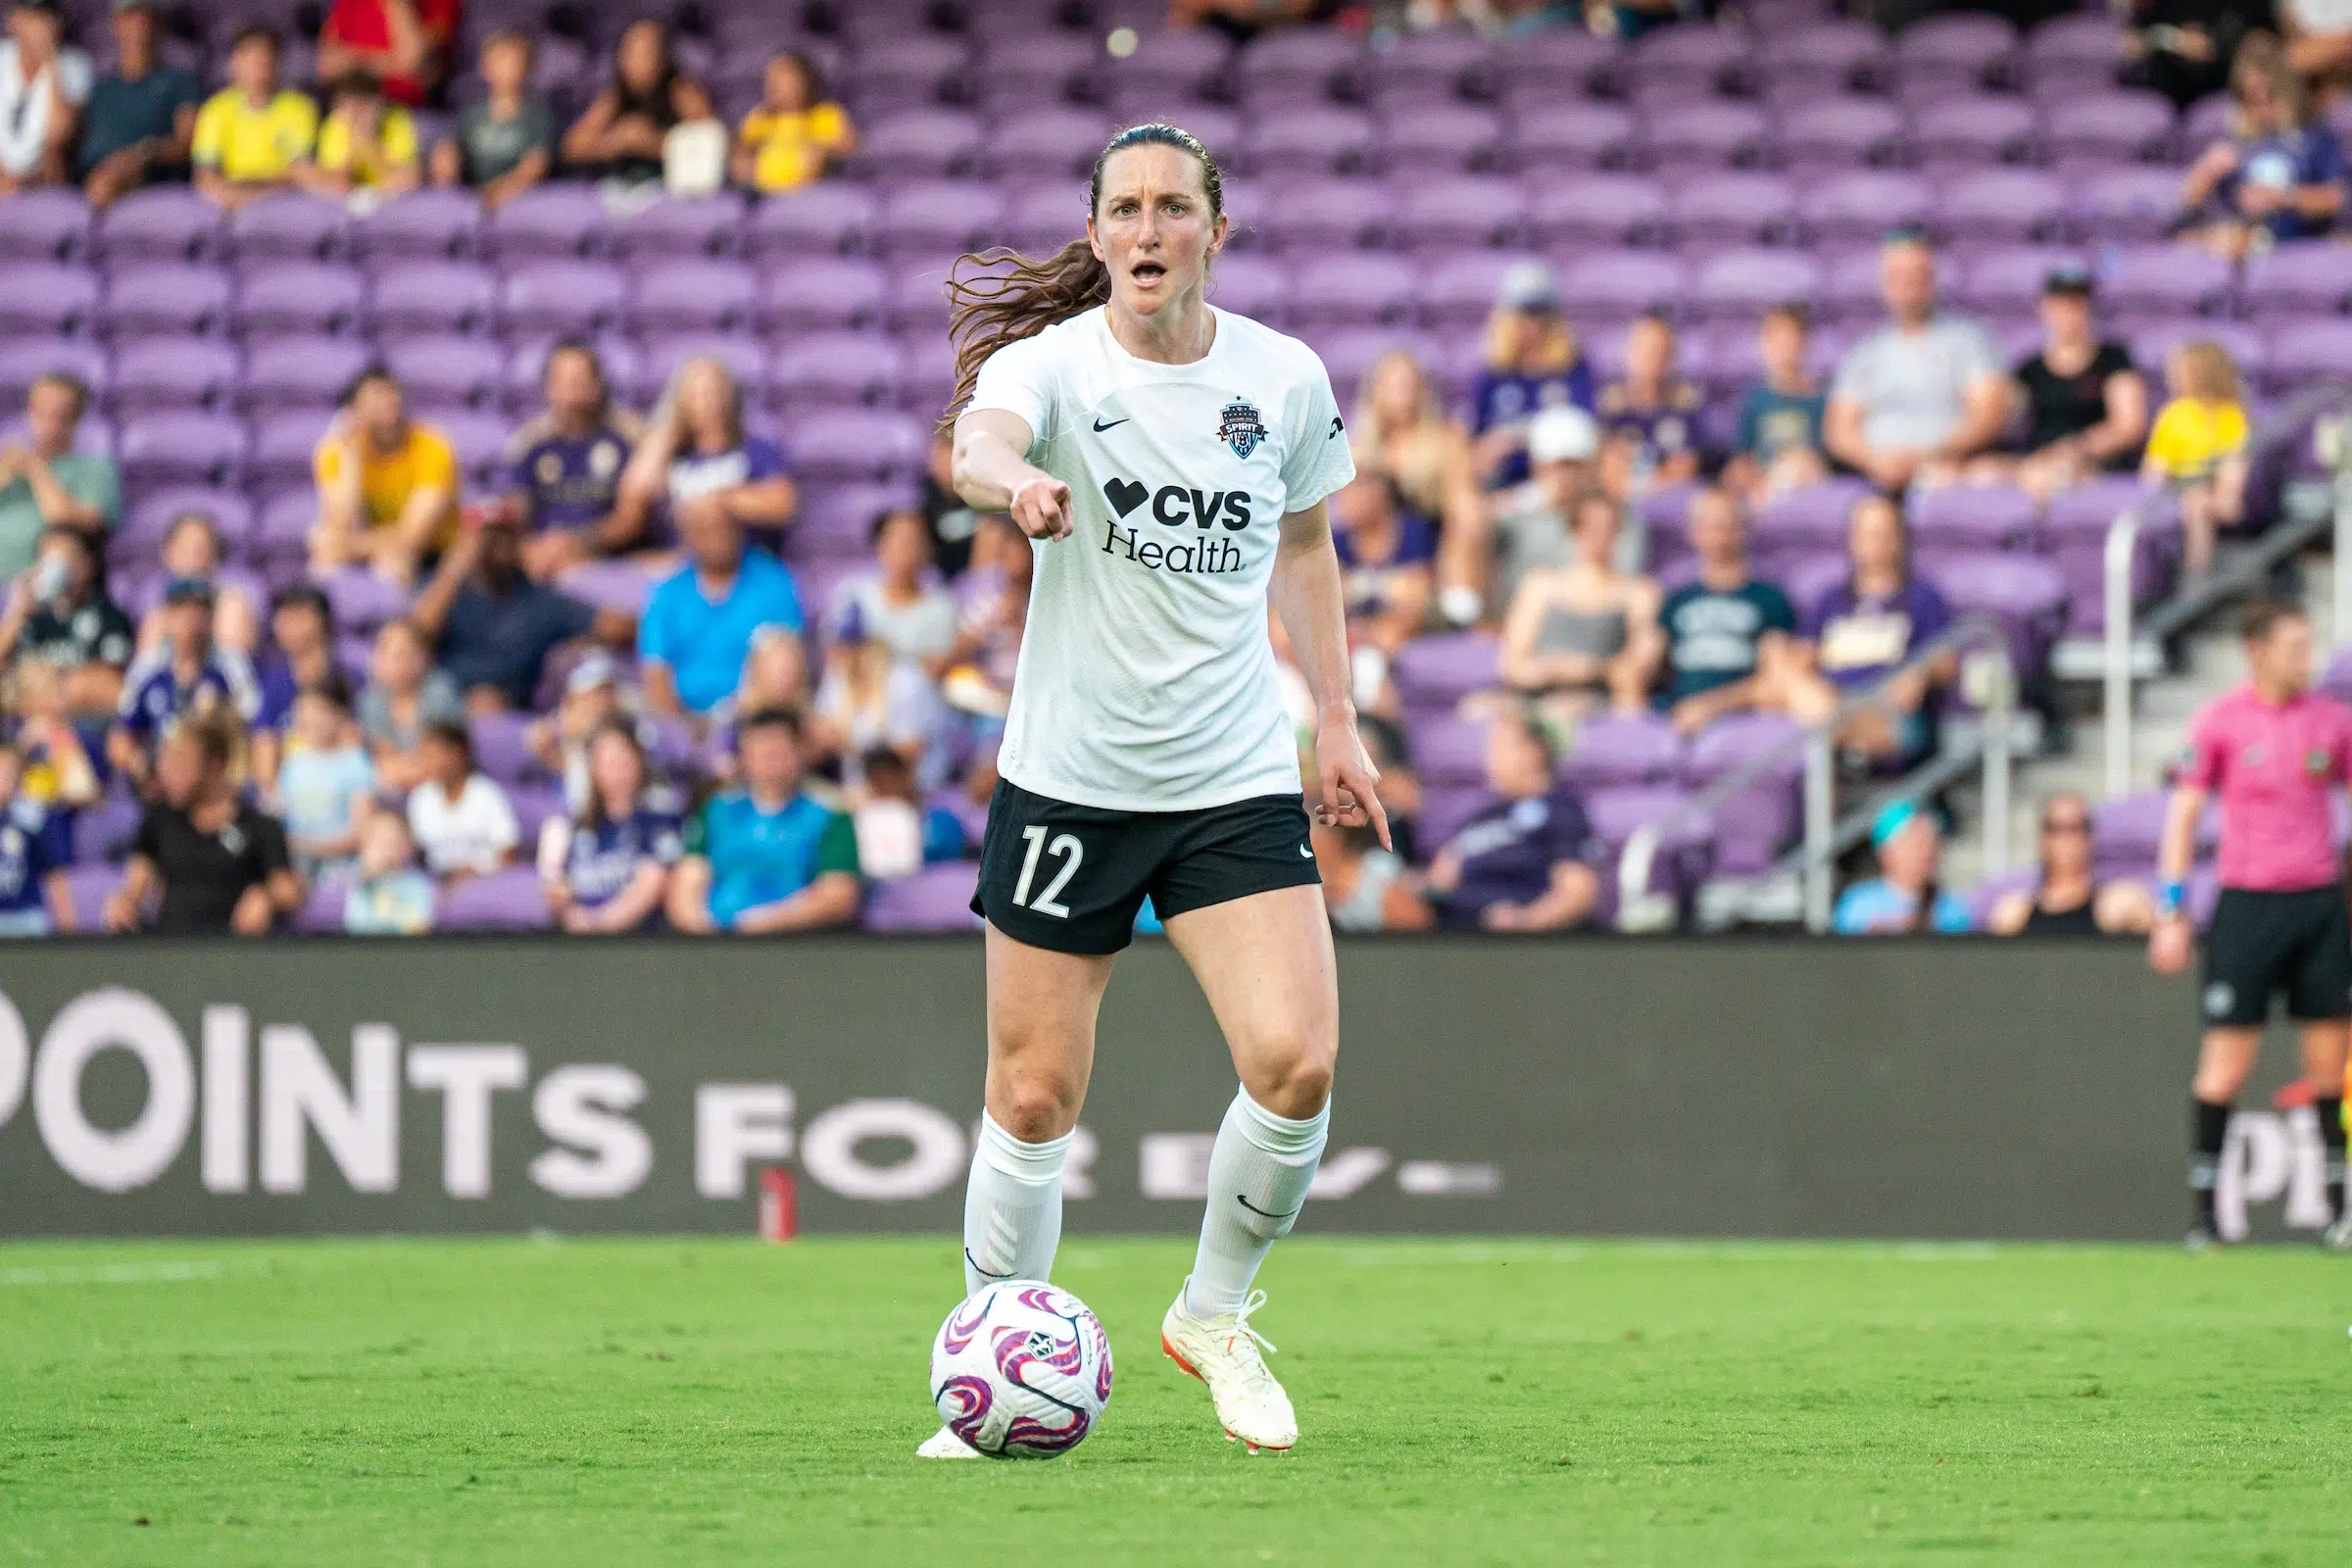 Andi Sullivan in a white top, black shorts and white socks dribbles a soccer ball and points with the index finger of her right hand.